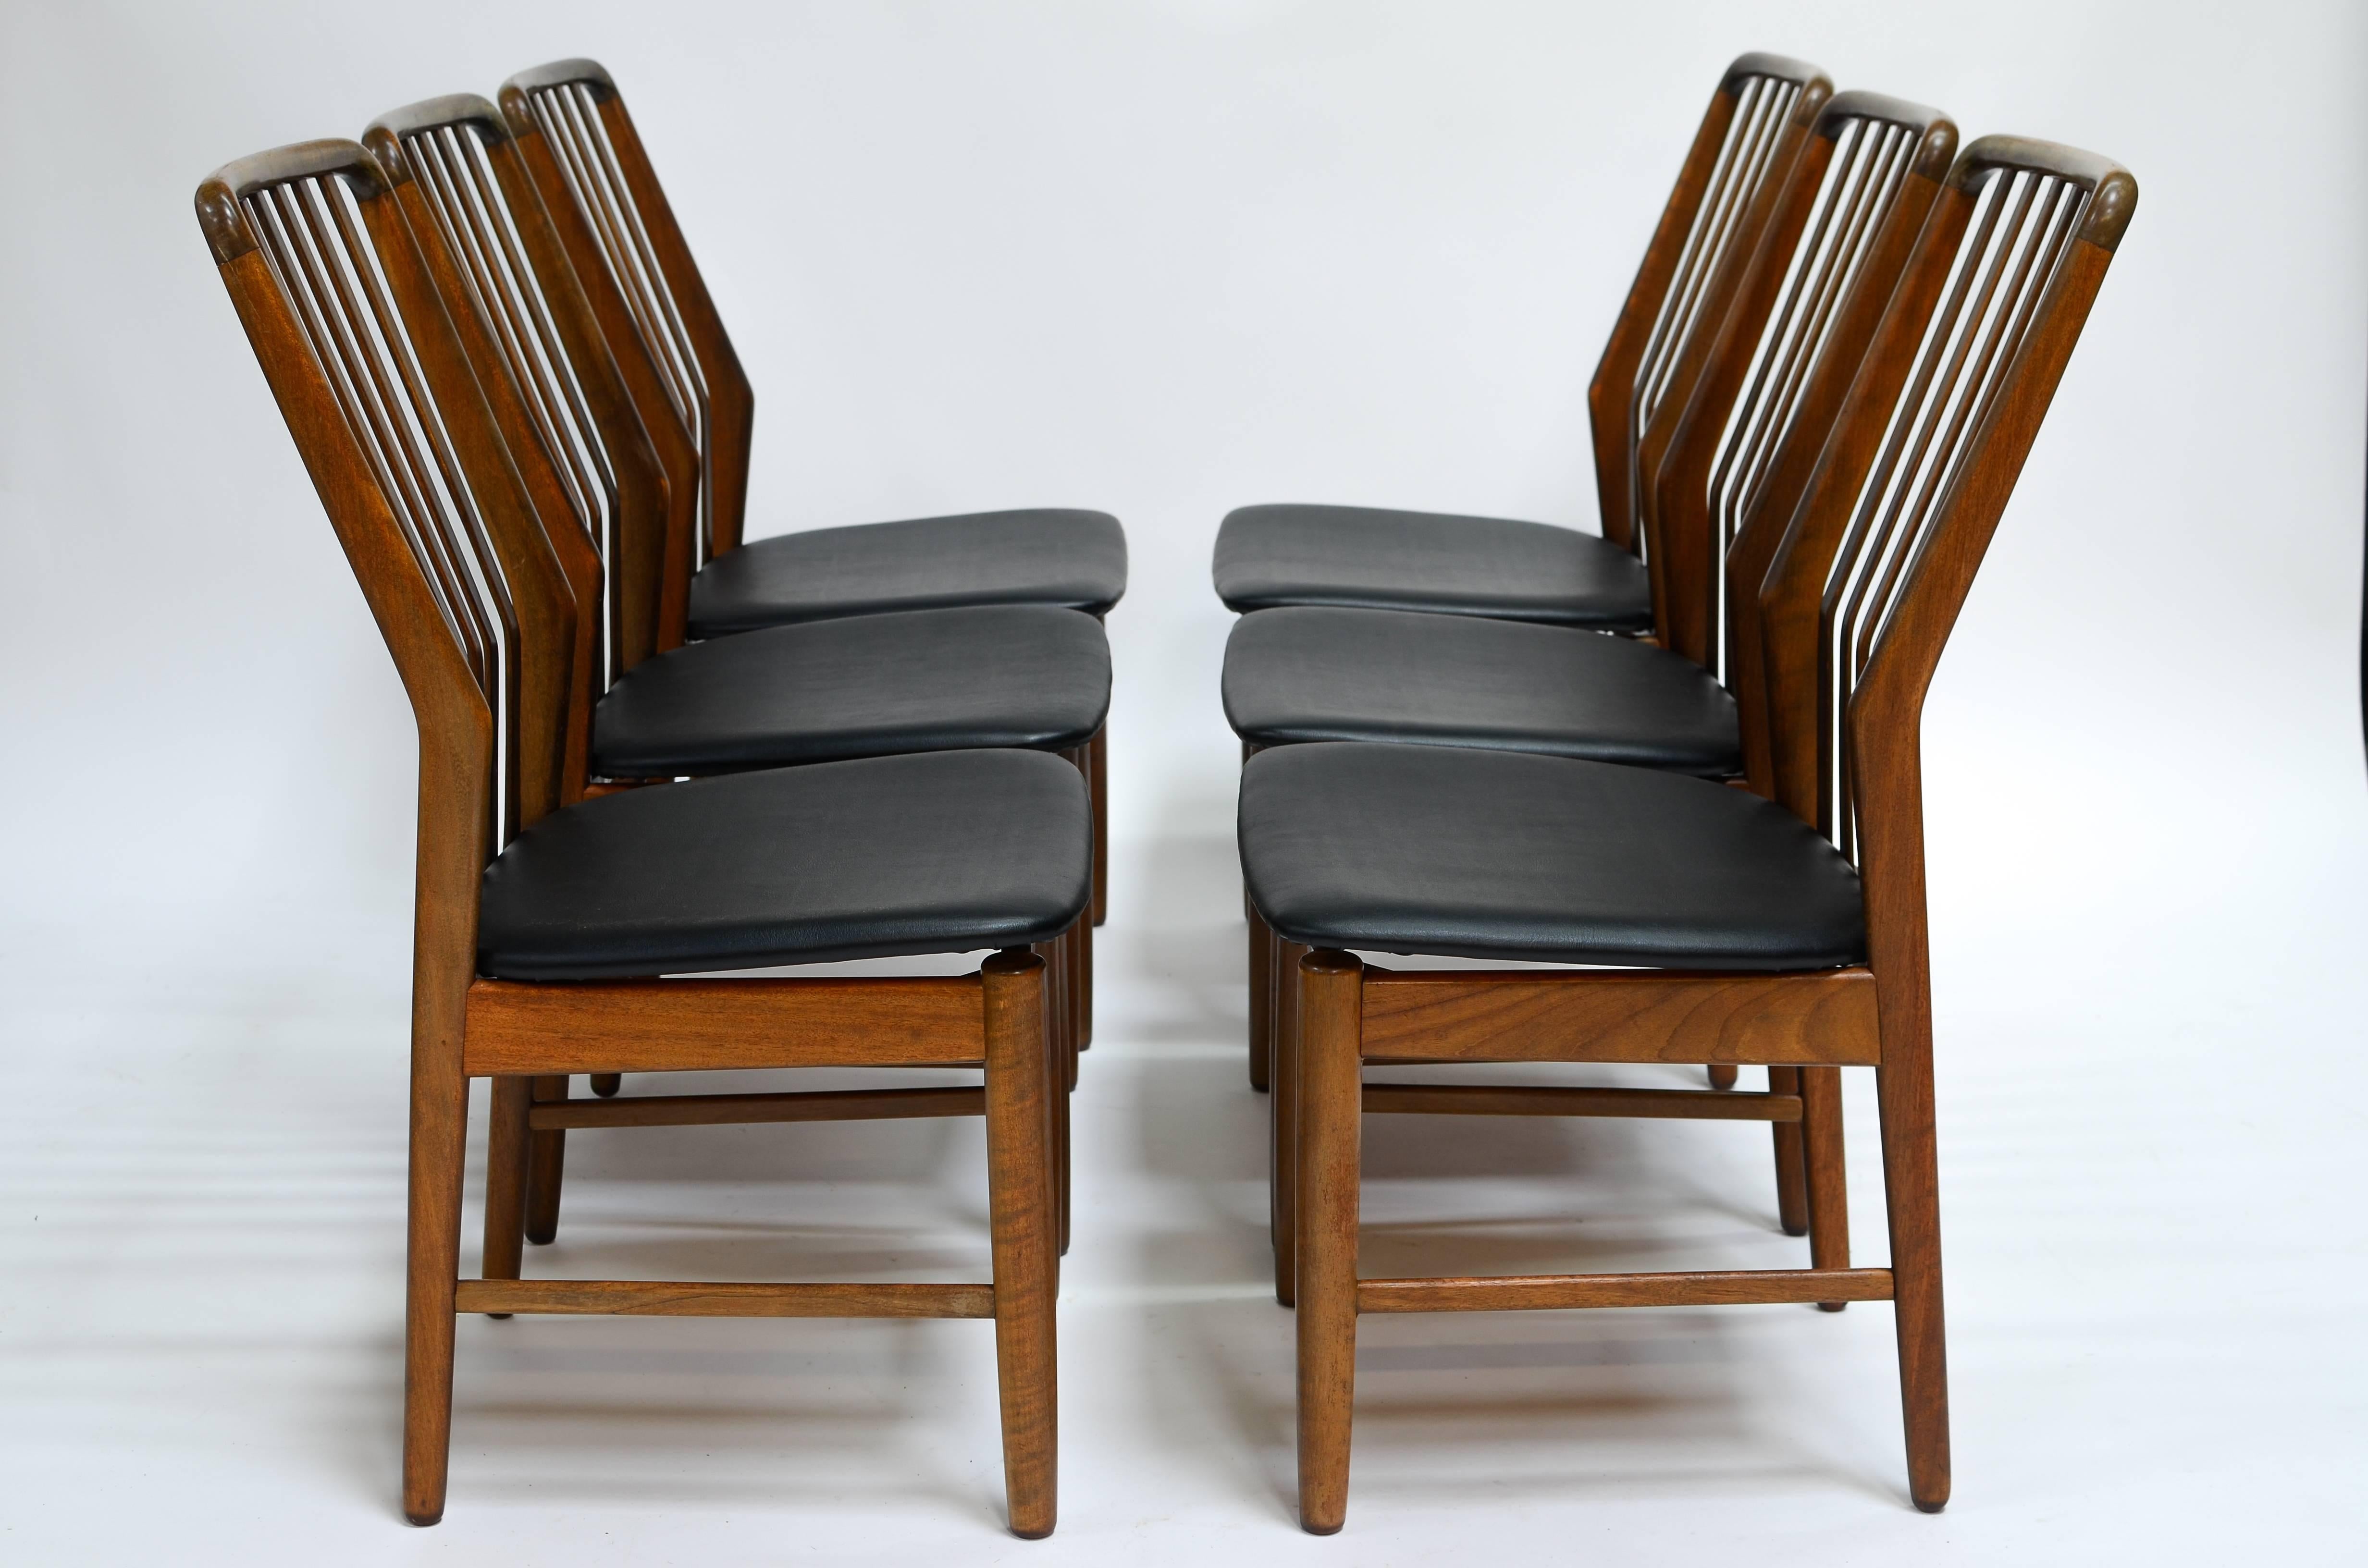   Svend A. Madsen Danish Modern Walnut Dining Chairs  In Good Condition For Sale In Berkeley, CA